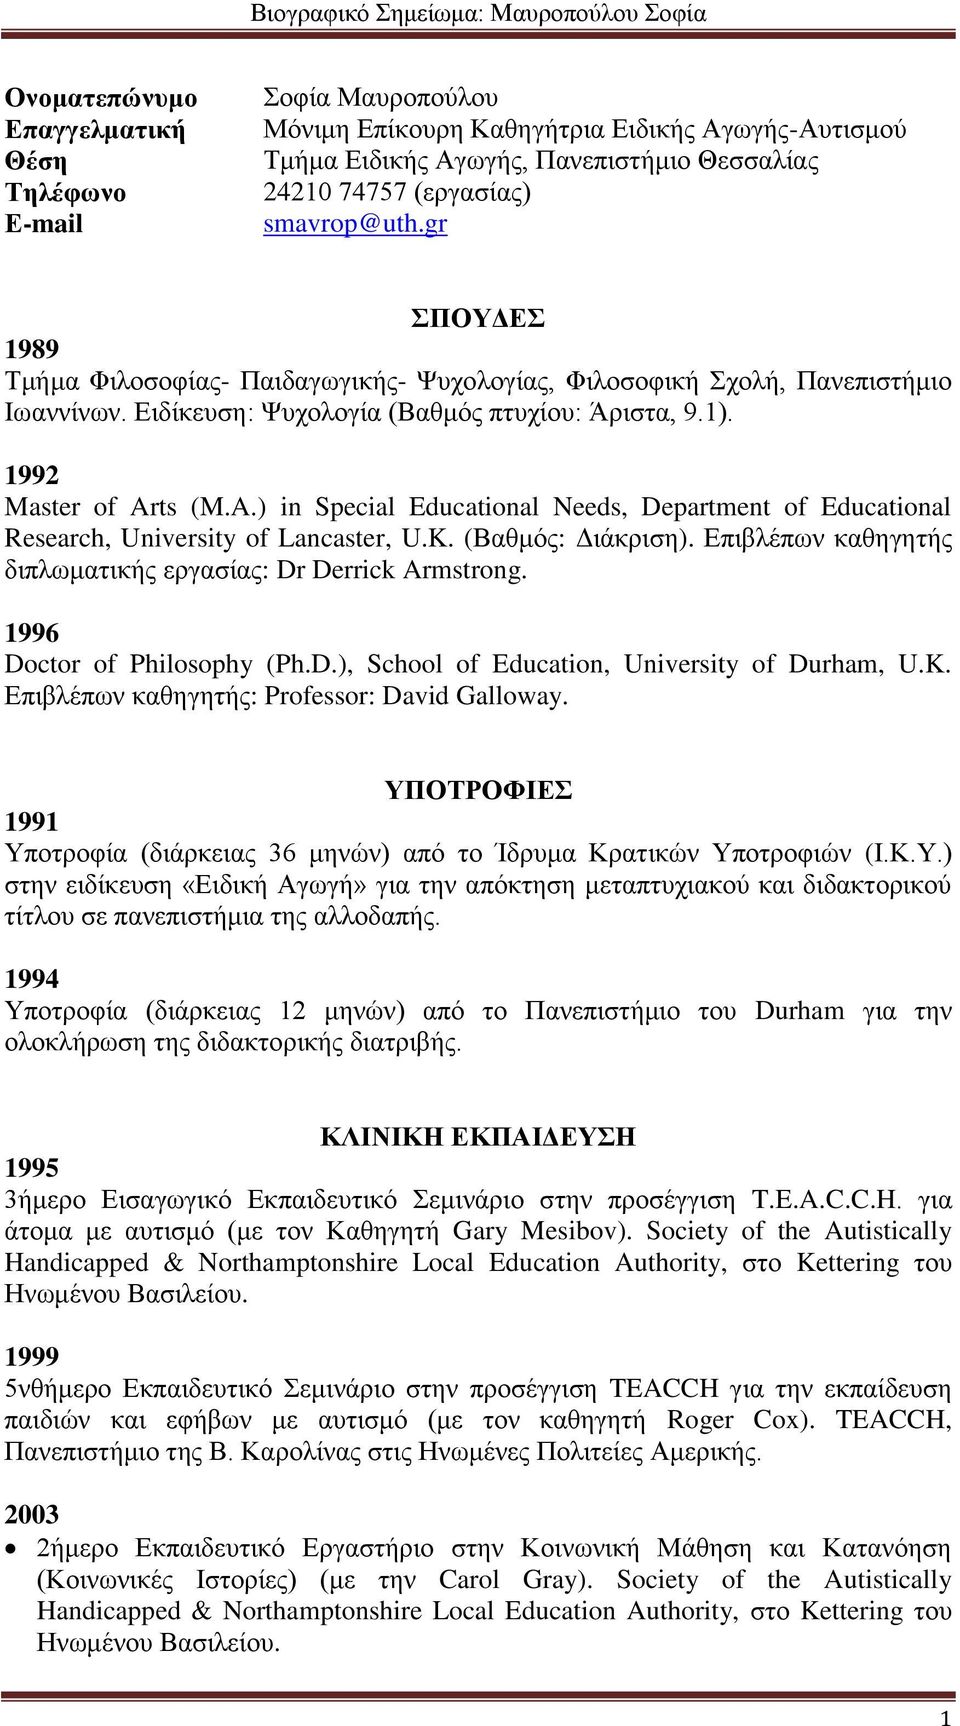 ts (M.A.) in Special Educational Needs, Department of Educational Research, University of Lancaster, U.K. (Βαθμός: Διάκριση). Επιβλέπων καθηγητής διπλωματικής εργασίας: Dr Derrick Armstrong.